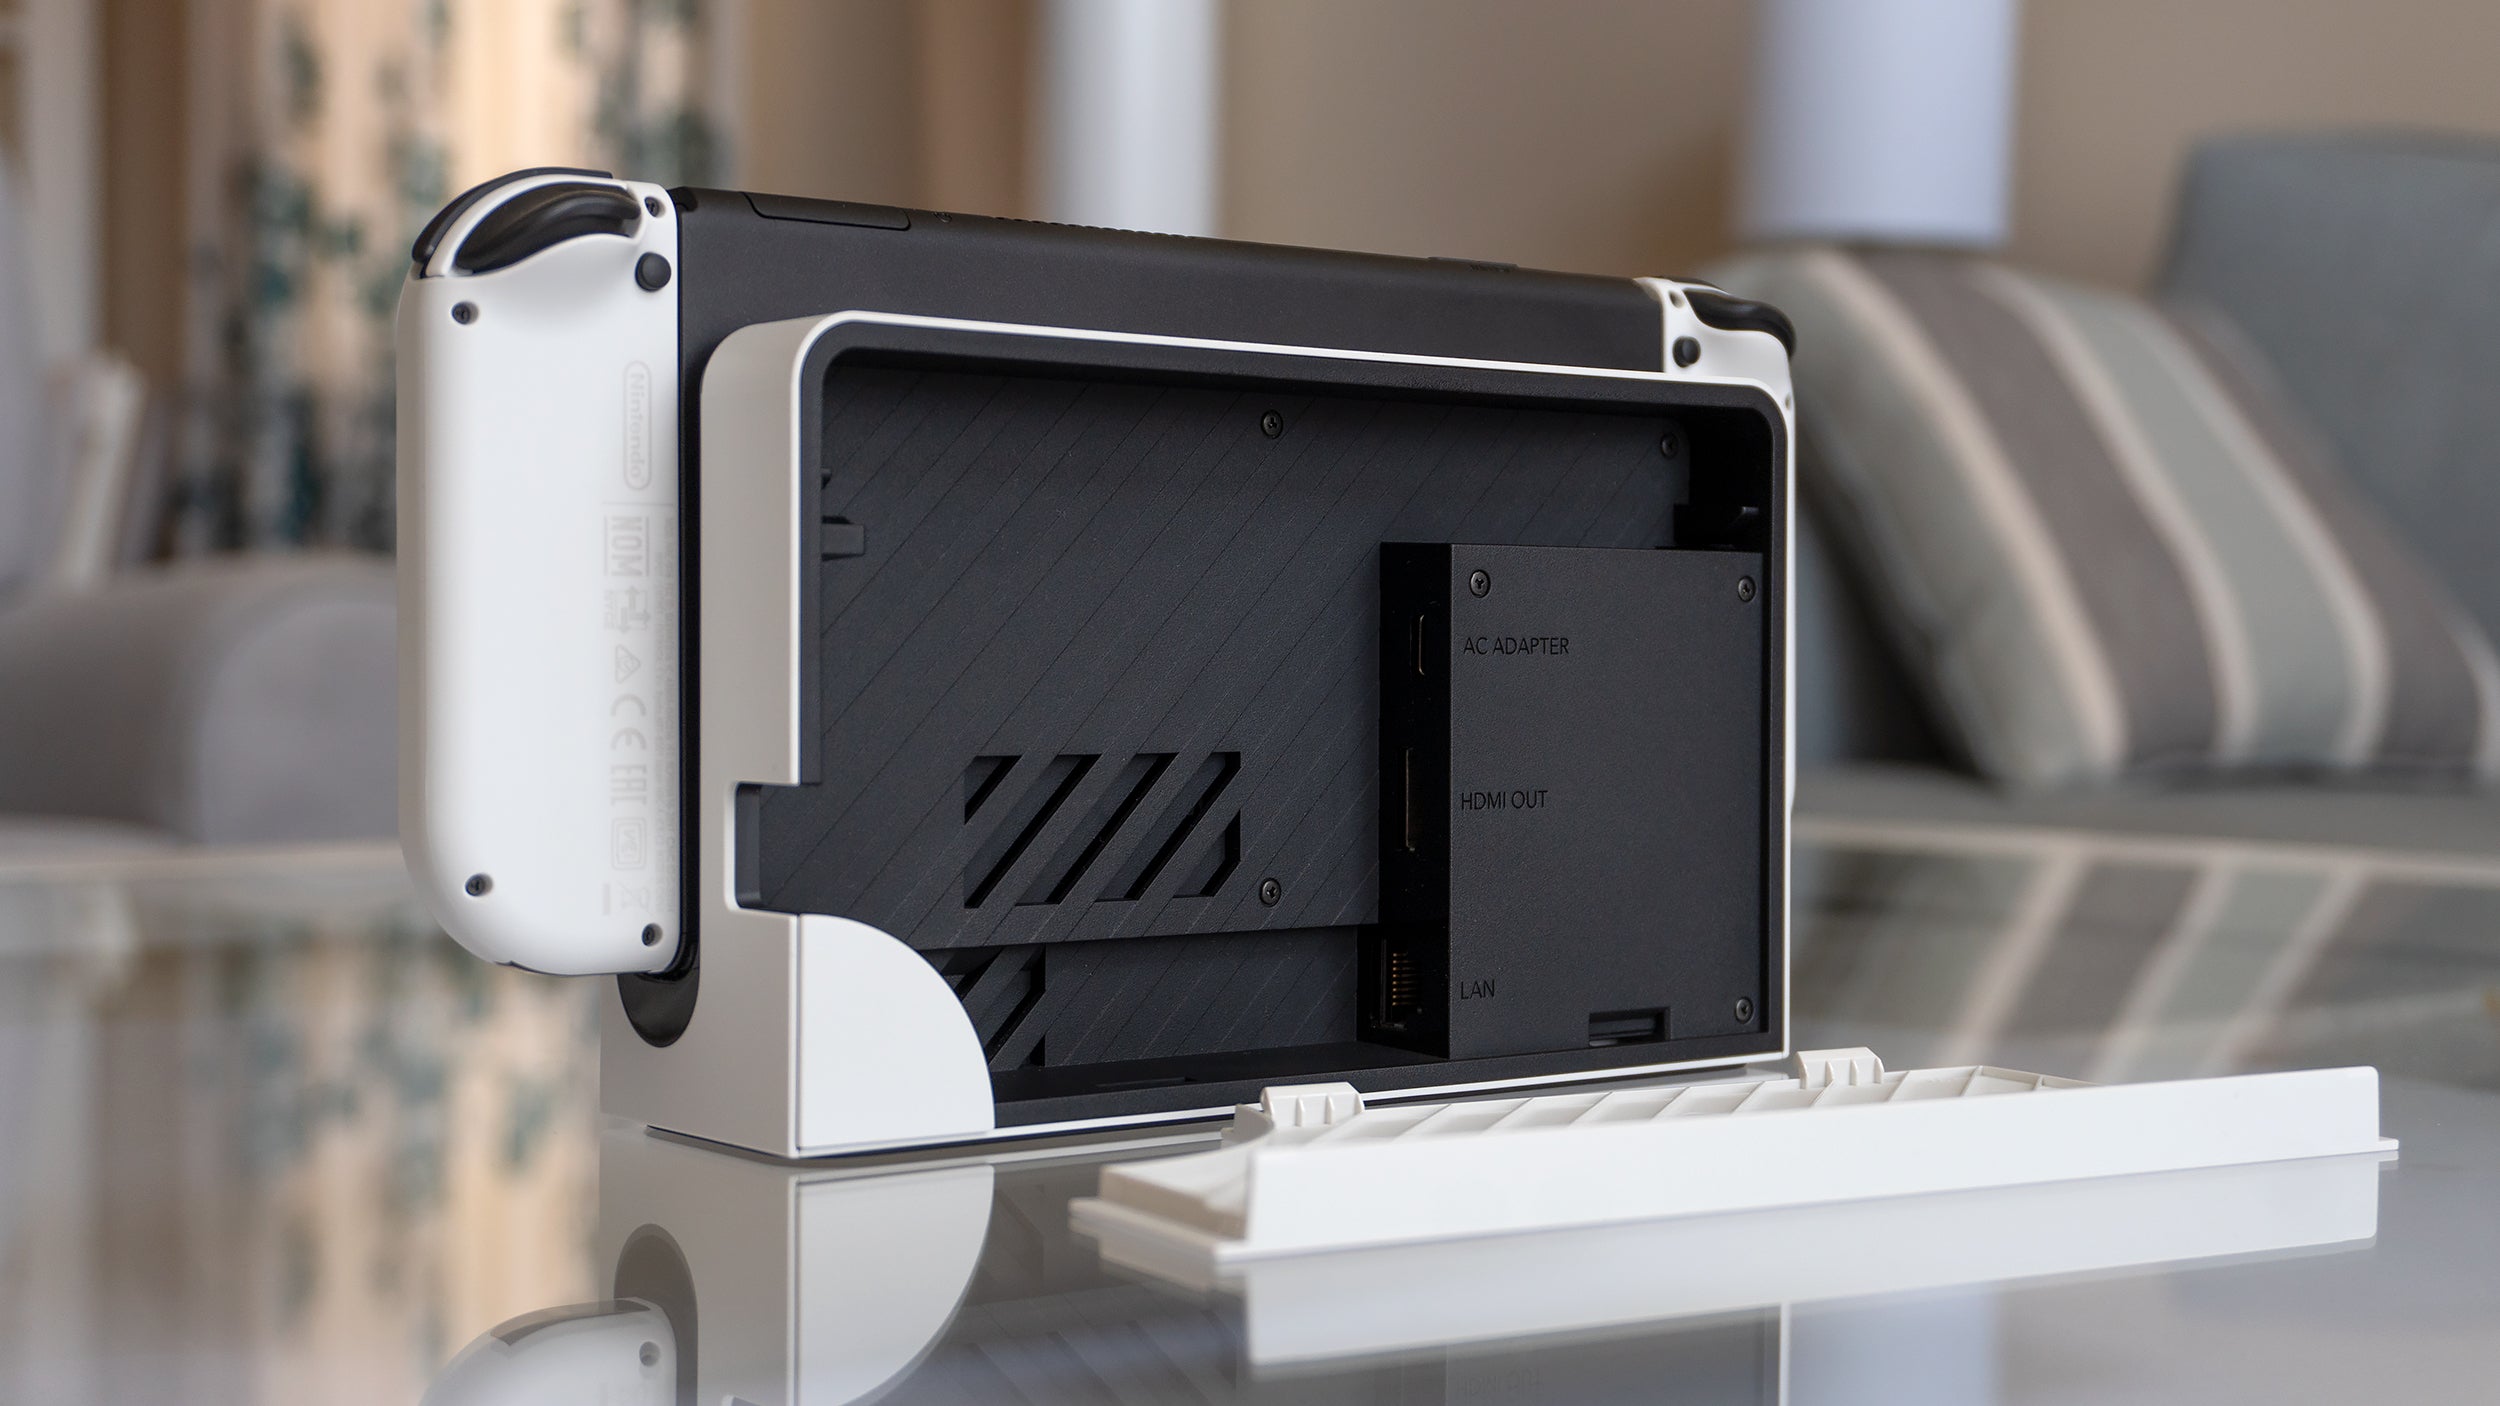 The back panel can be completely removed on the Switch OLED's dock, providing easier access to all the ports, including an added port for a network cable. (Photo: Andrew Liszewski - Gizmodo)